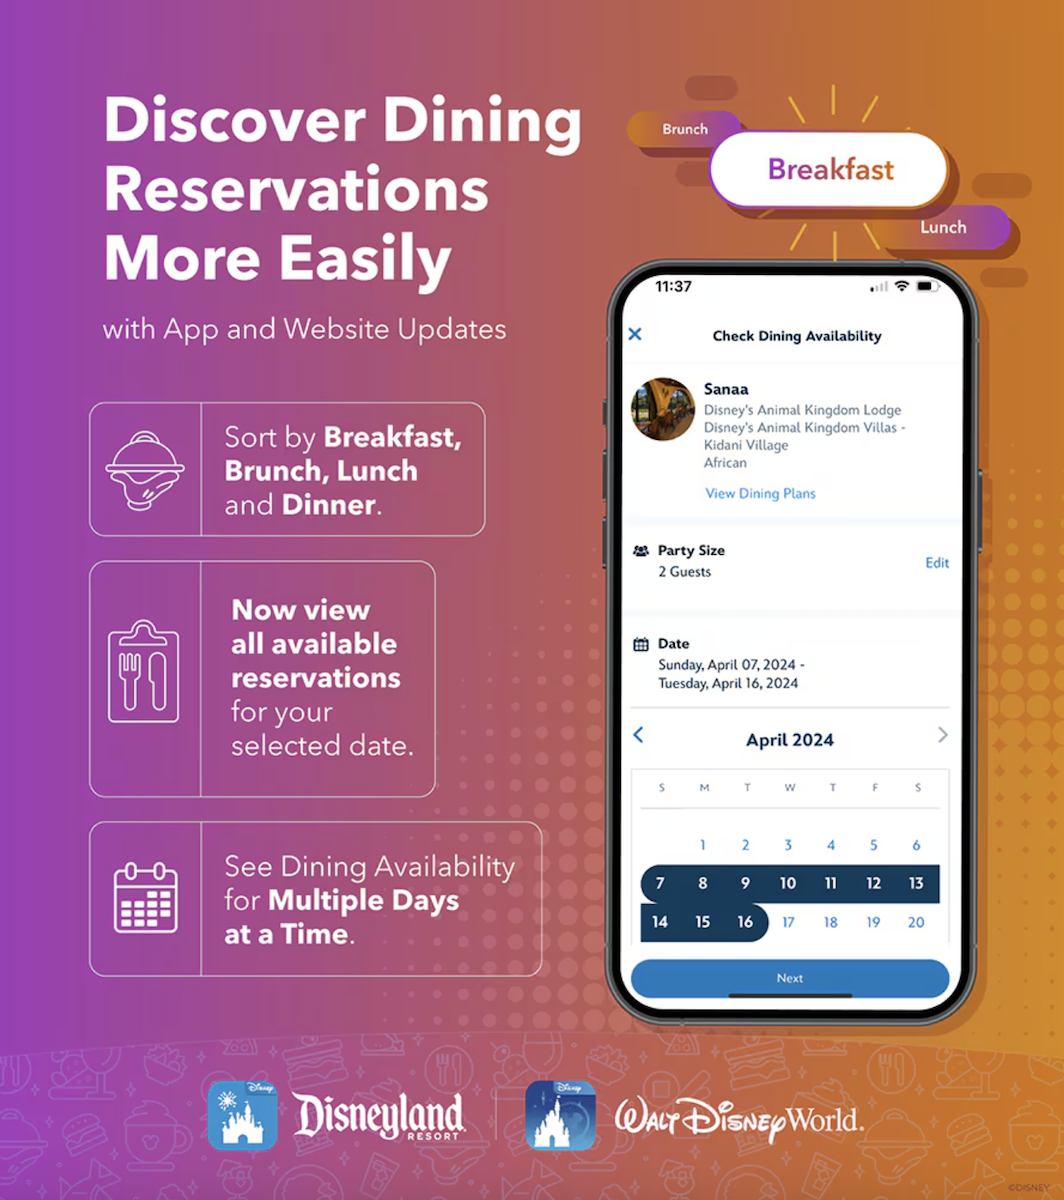 Disney dining reservation changes shown